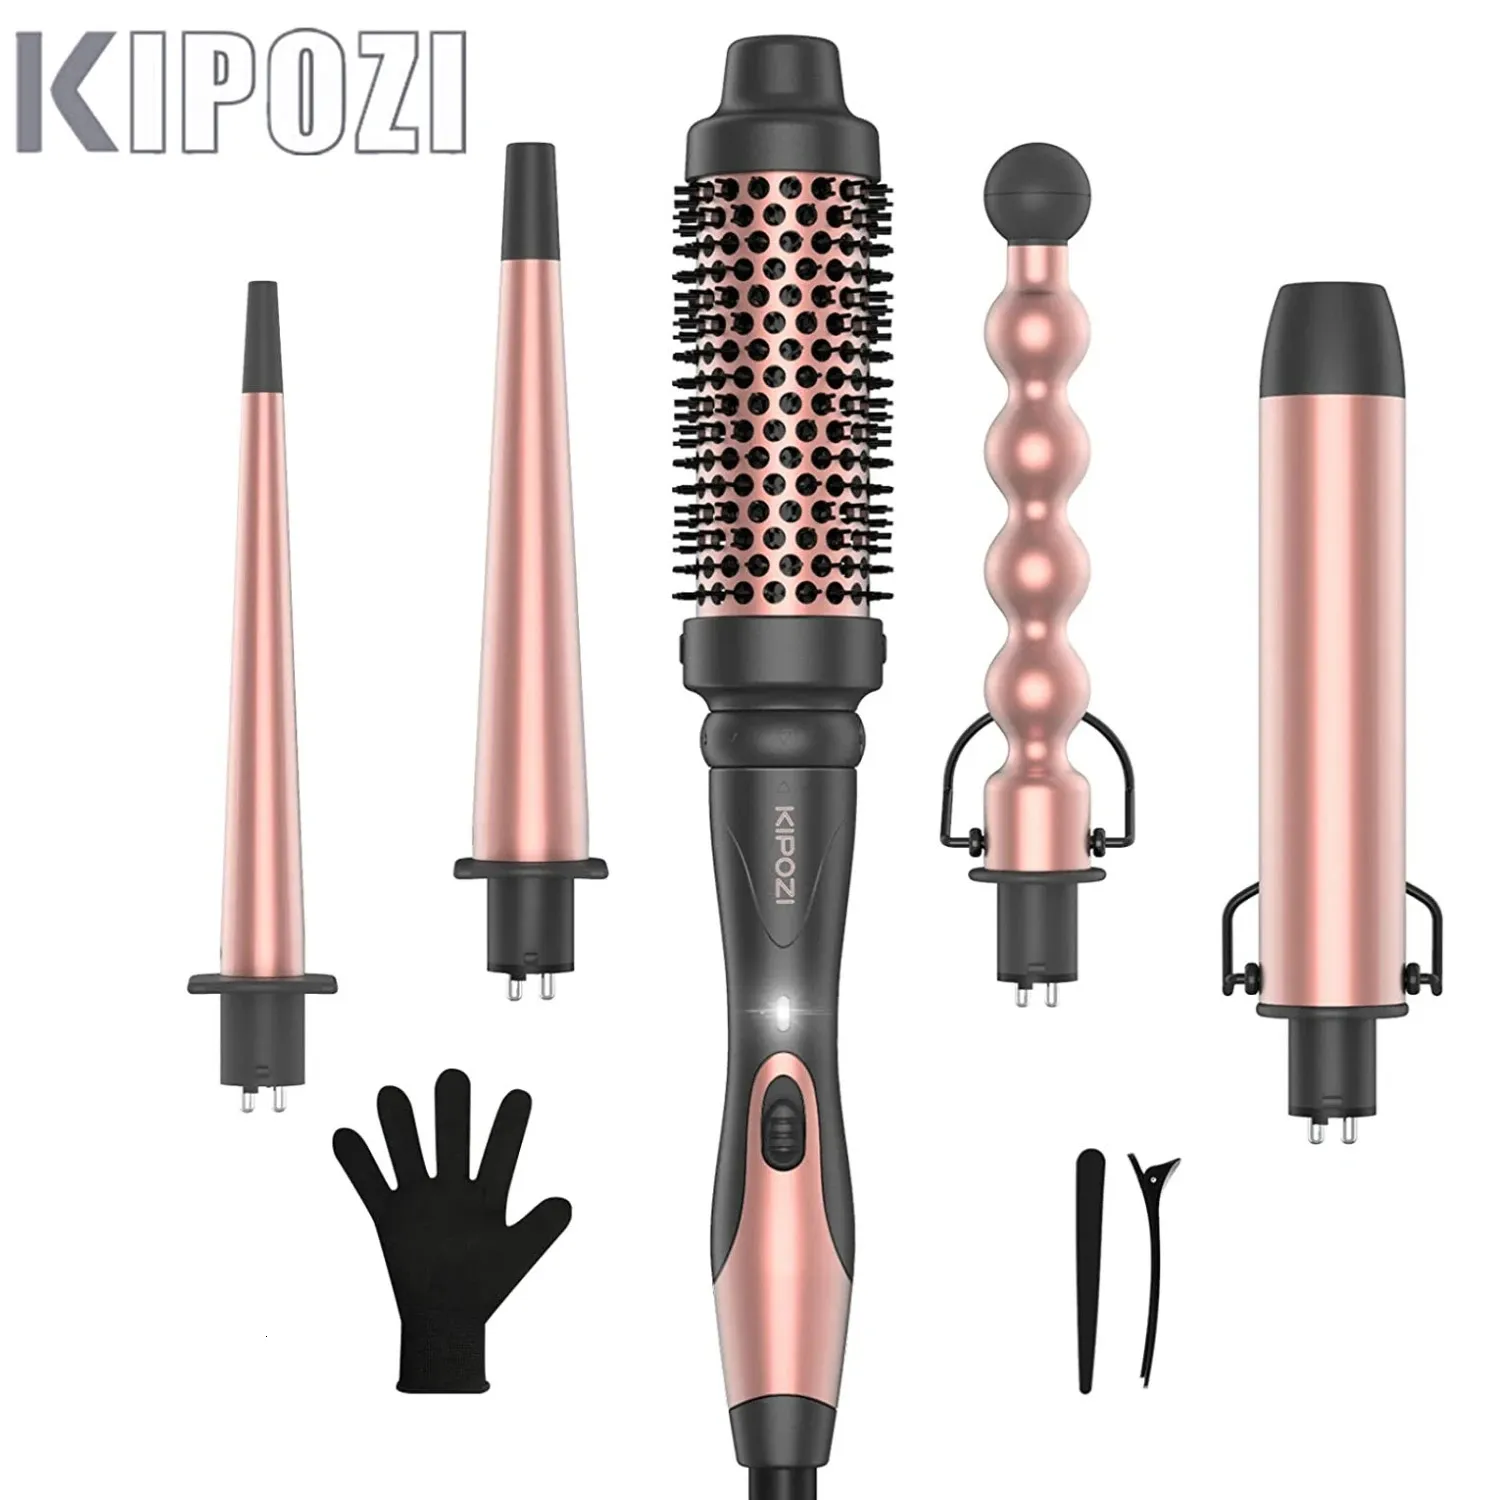 KIPOZI Professional Curling Iron 5-in-1 Hair Tools Instant Heating Electric Curling Iron Air Brush Ceramic Barrels for Woman 240327